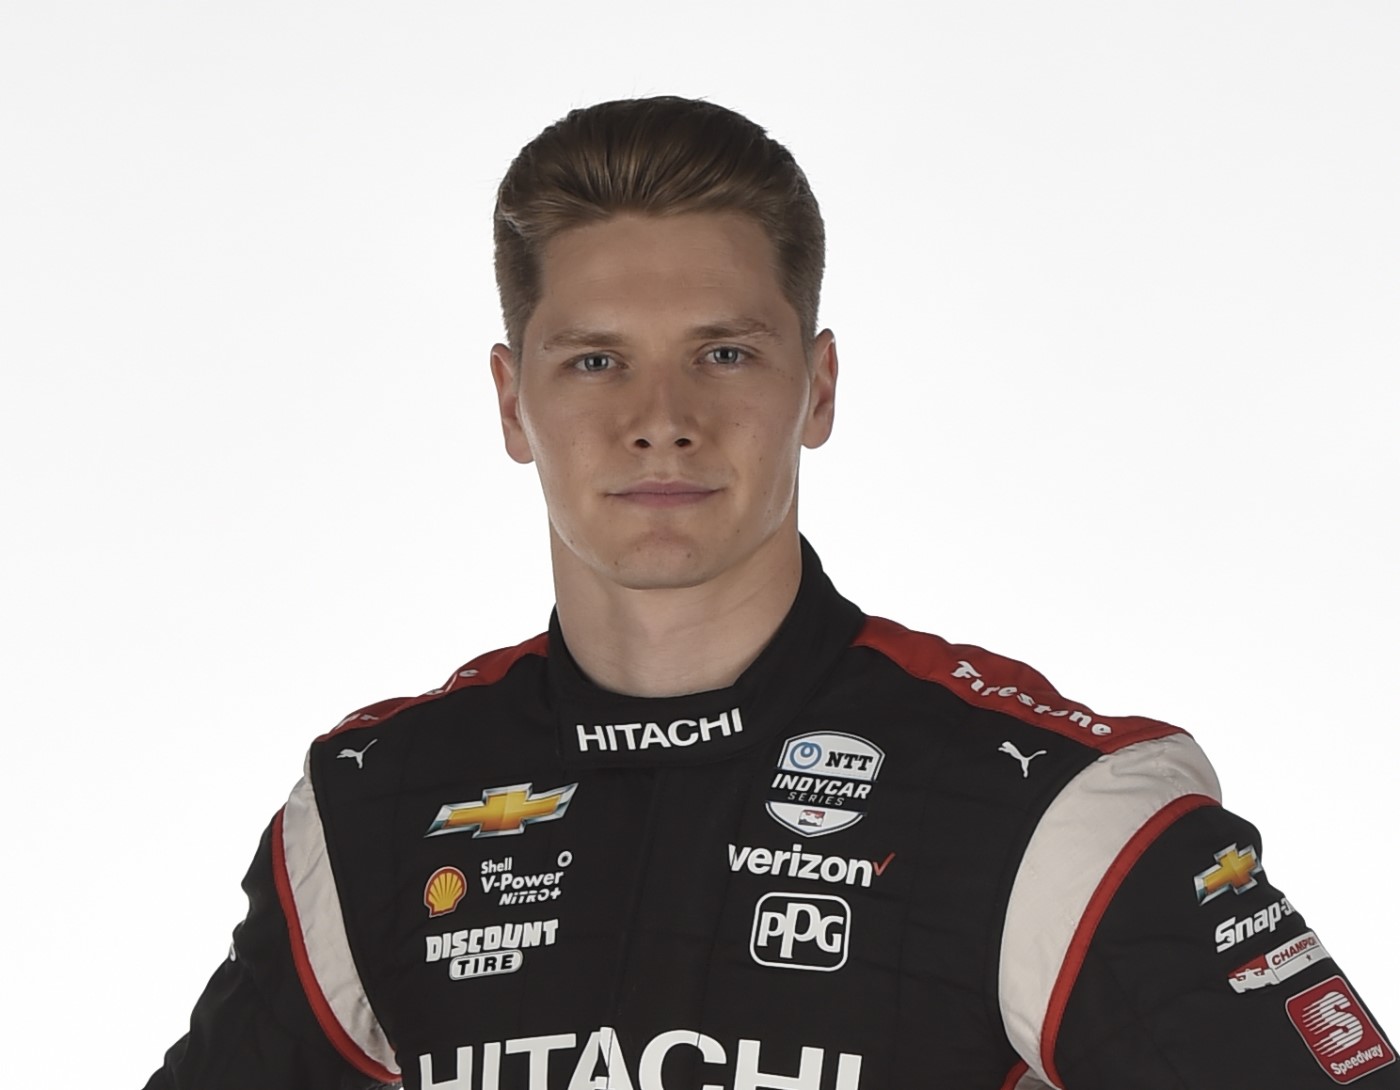 Josef Newgarden drives for Team Penske. Team Penske delivers Indy 500 champions and season title championships. Over 90% chance Newgarden will win the 2019 title - his 2nd.